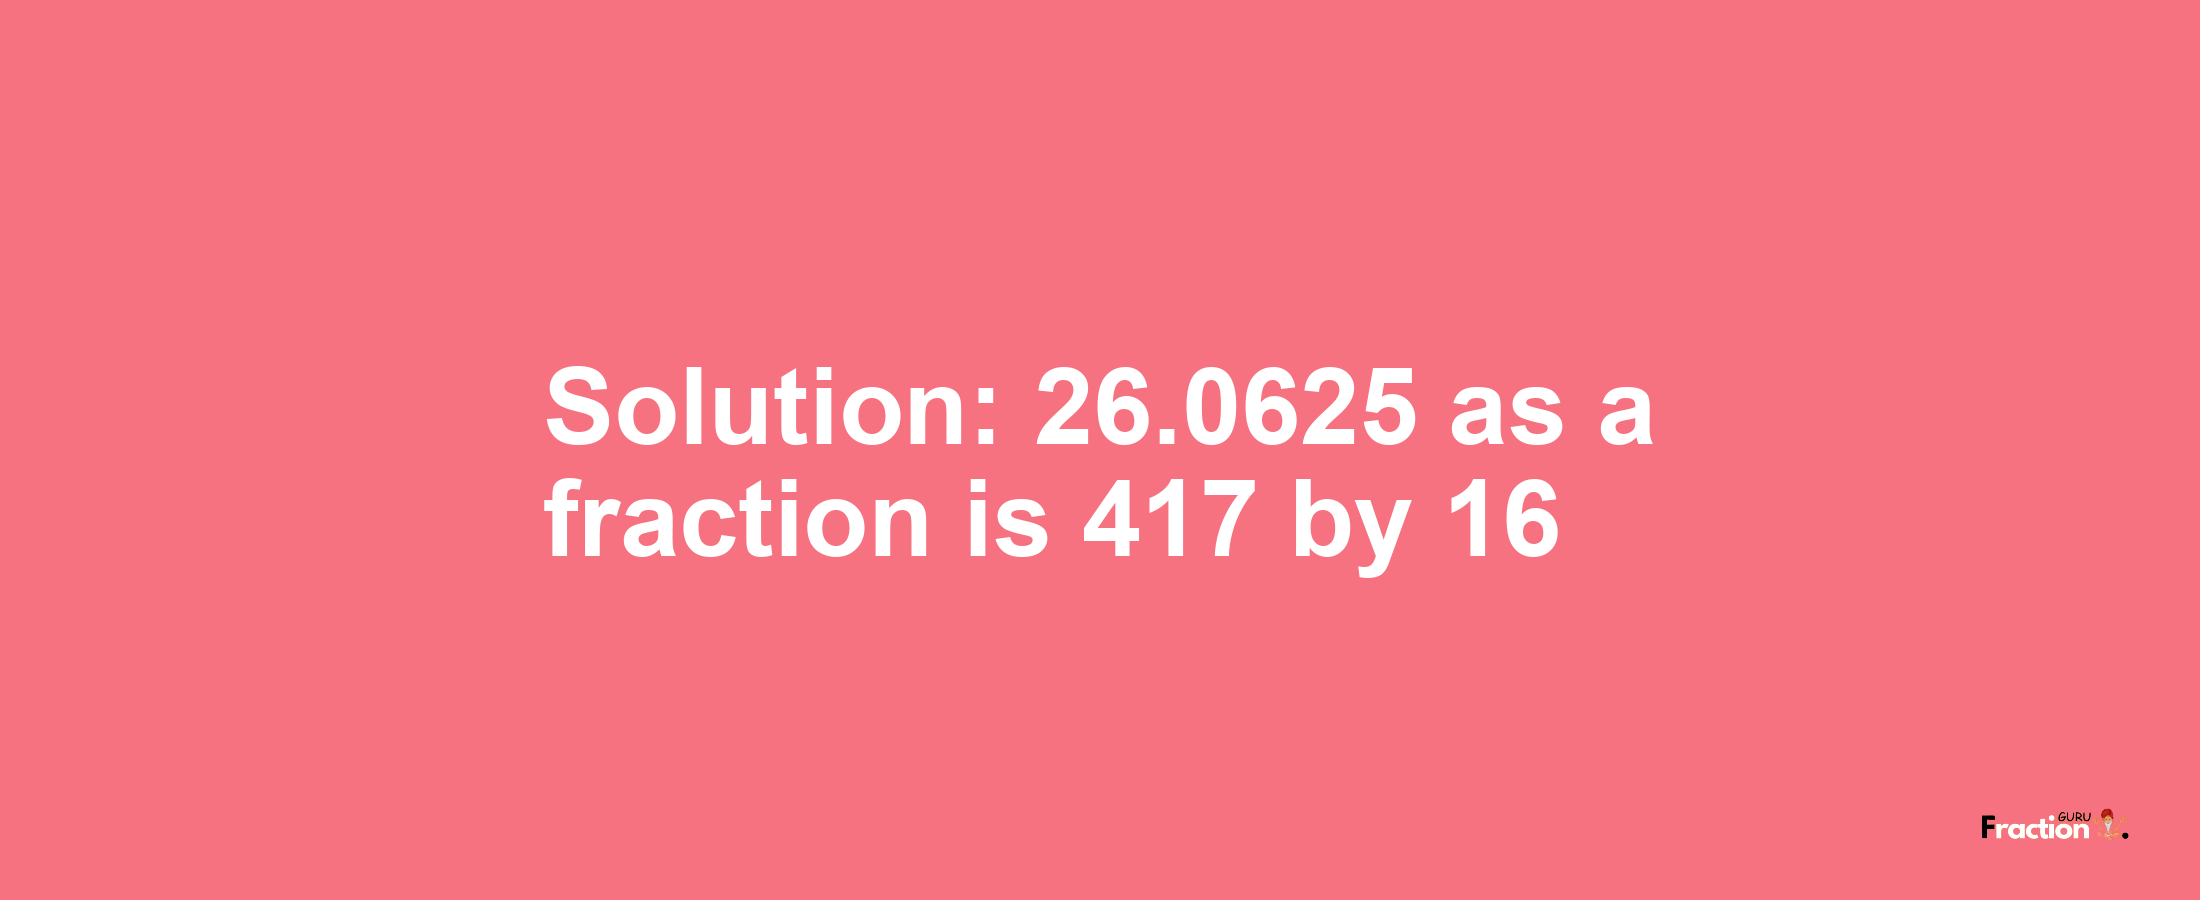 Solution:26.0625 as a fraction is 417/16